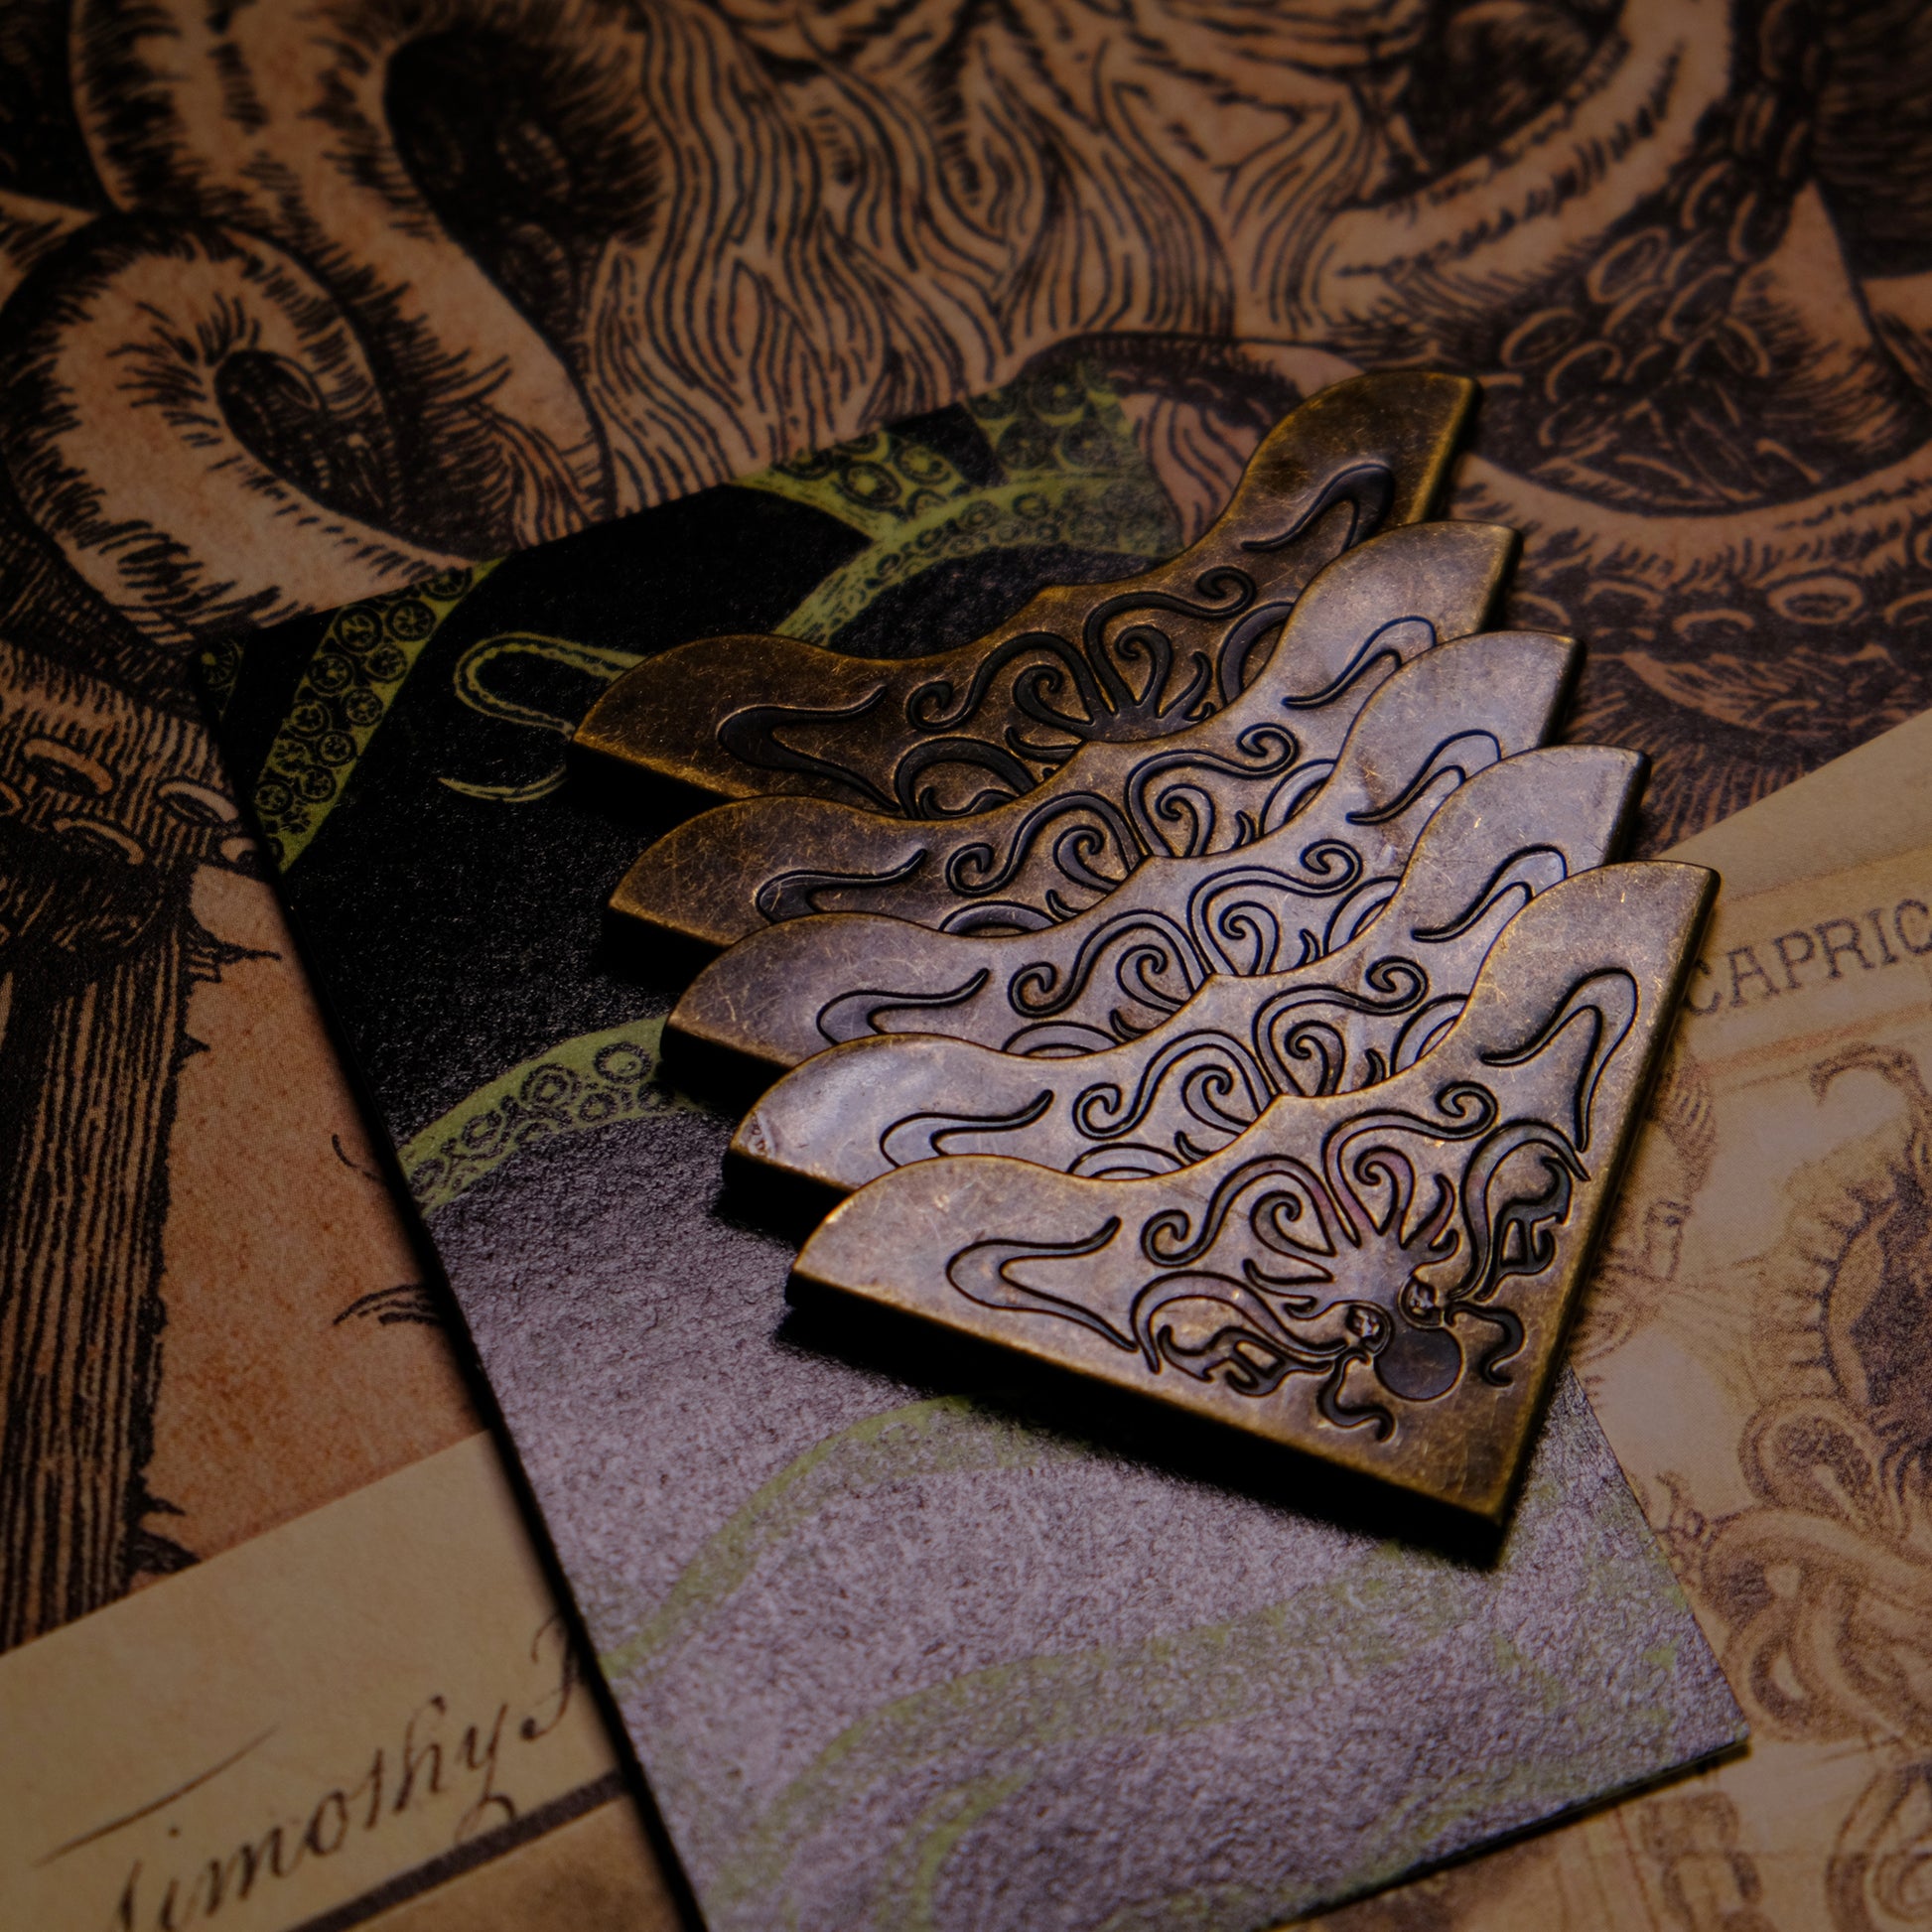 Bookworms from Shaggai Cthulhu Metal Book Corners – Vermilion